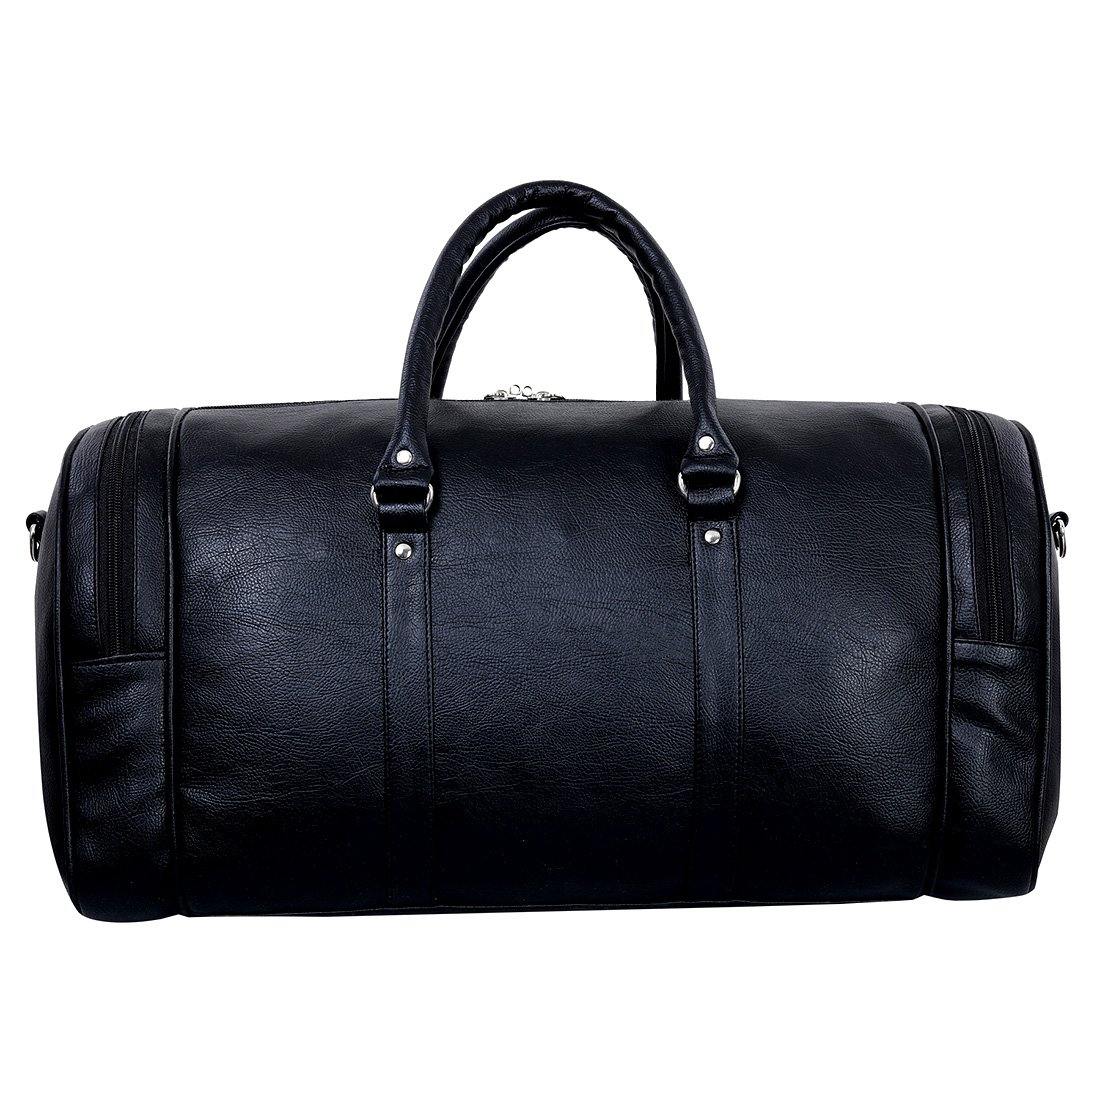 Leather World PU Leather Travel Duffle Bag for Men Women Luggage Sport